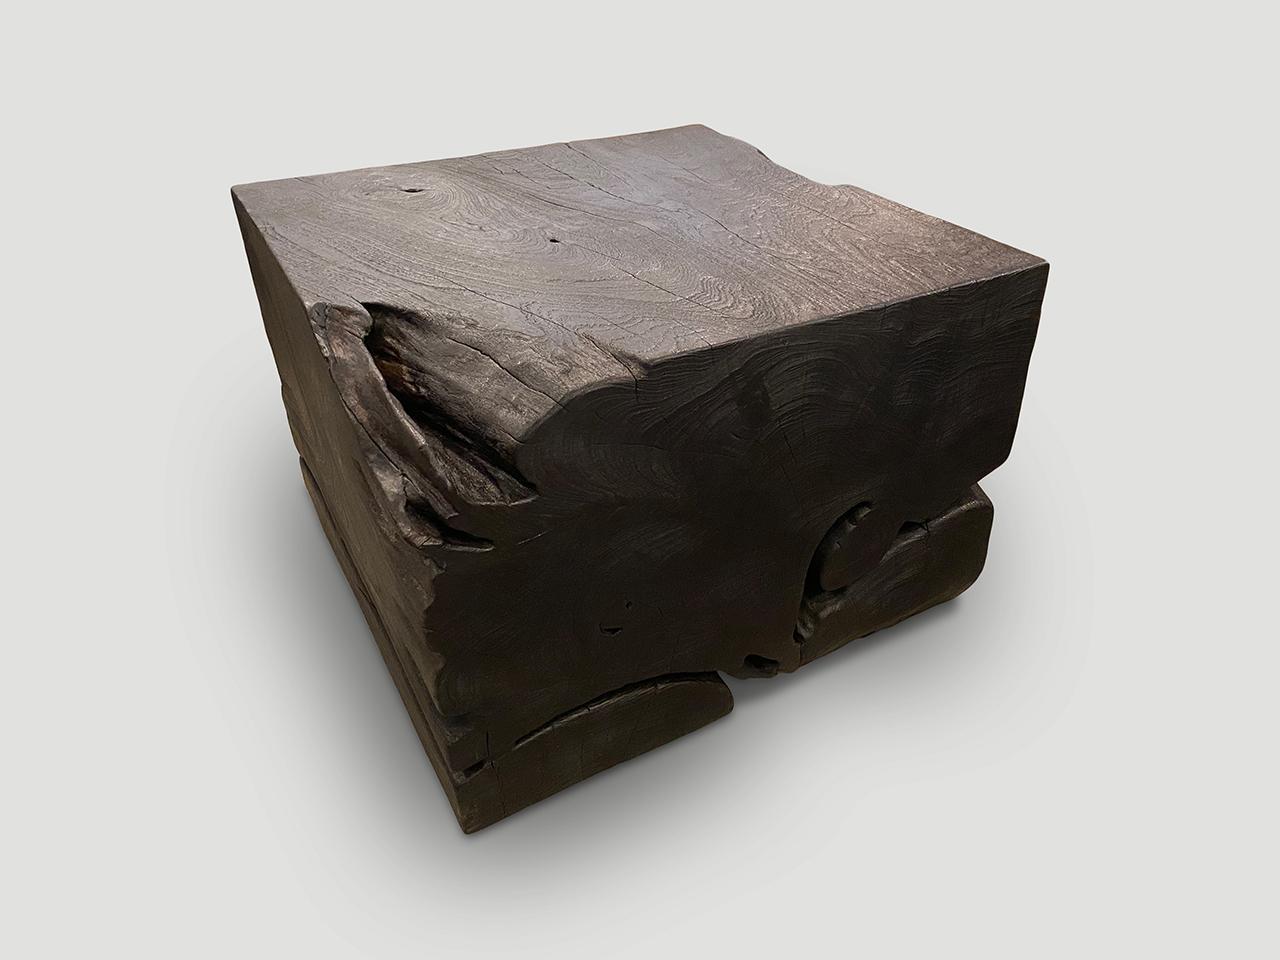 Impressive reclaimed teak wood coffee table. Charred, sanded and sealed revealing the beautiful wood grain. Custom stains and finishes available. Please inquire. 

The Triple Burnt Collection represents a unique line of modern furniture made from